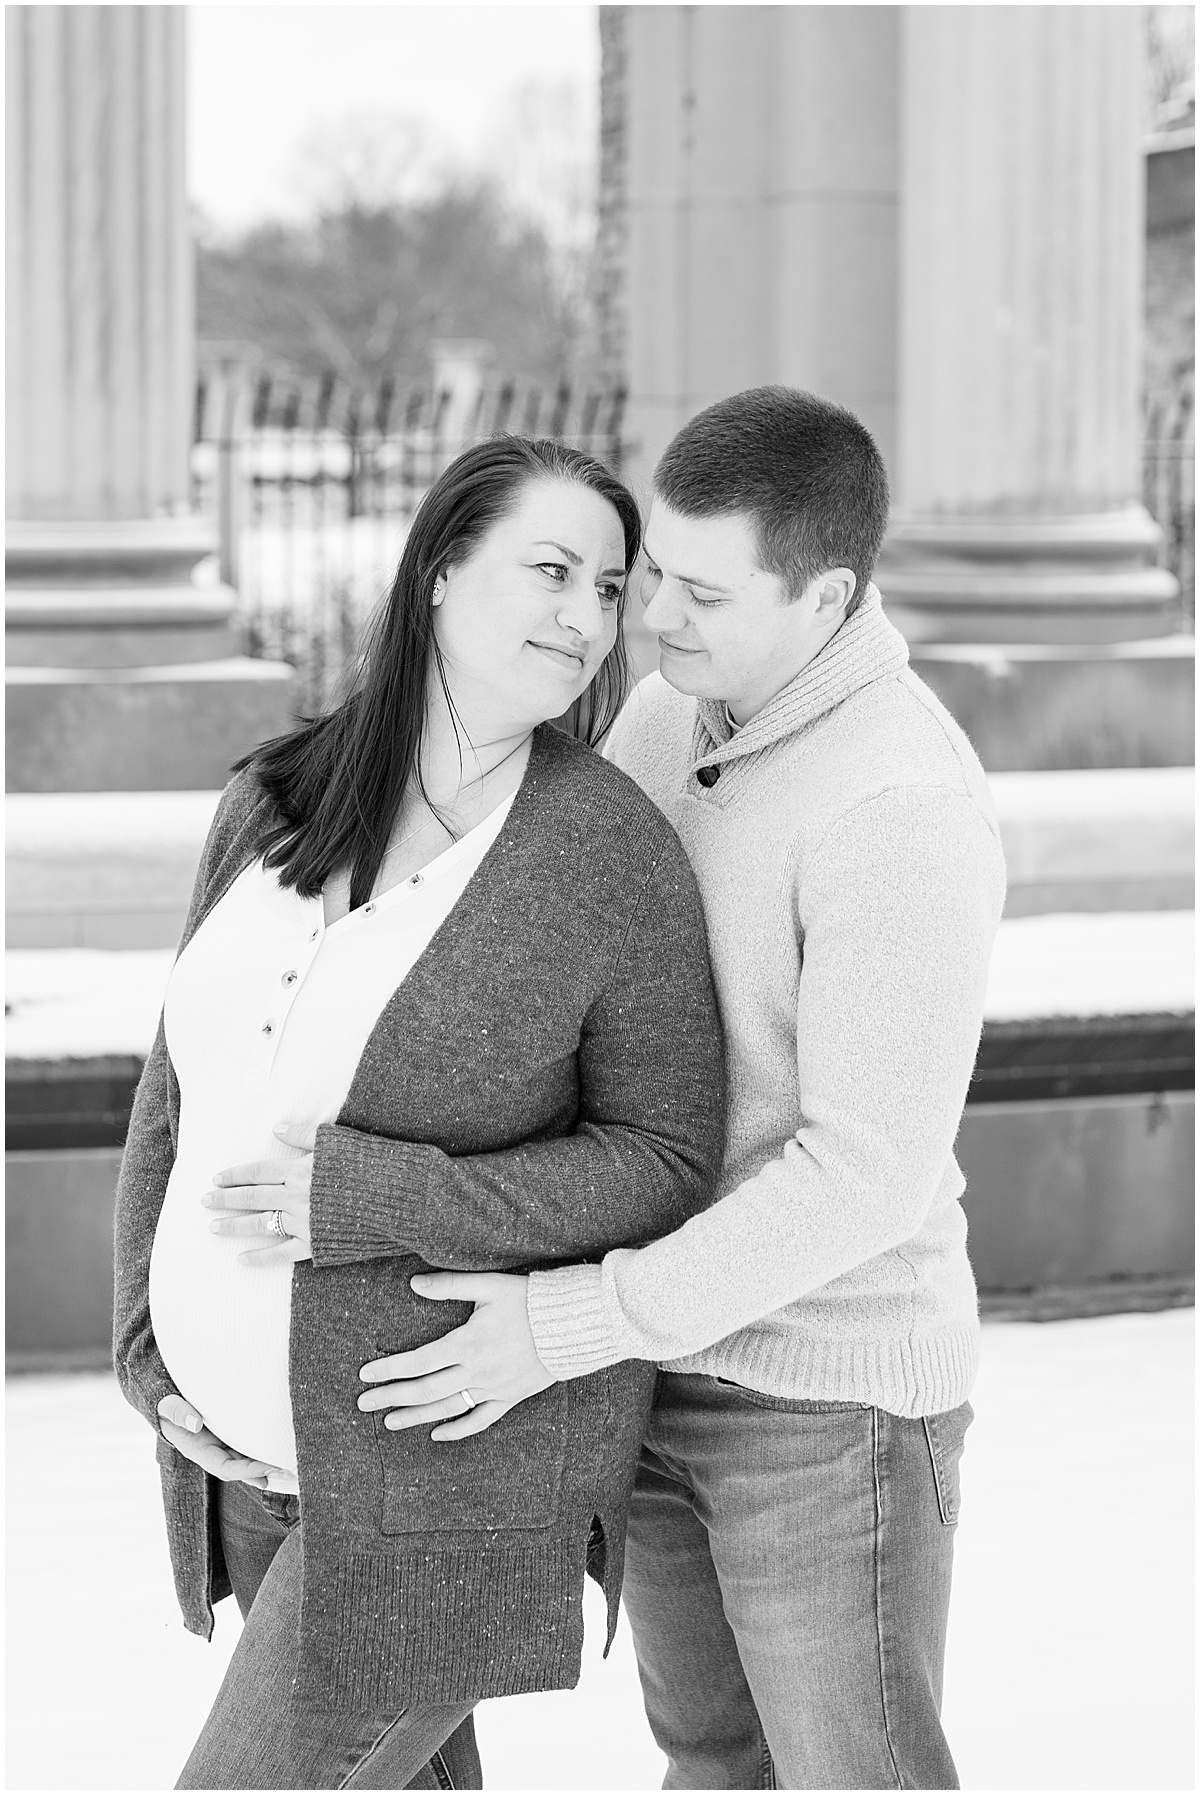 Holliday Park maternity photos in Indianapolis with snow